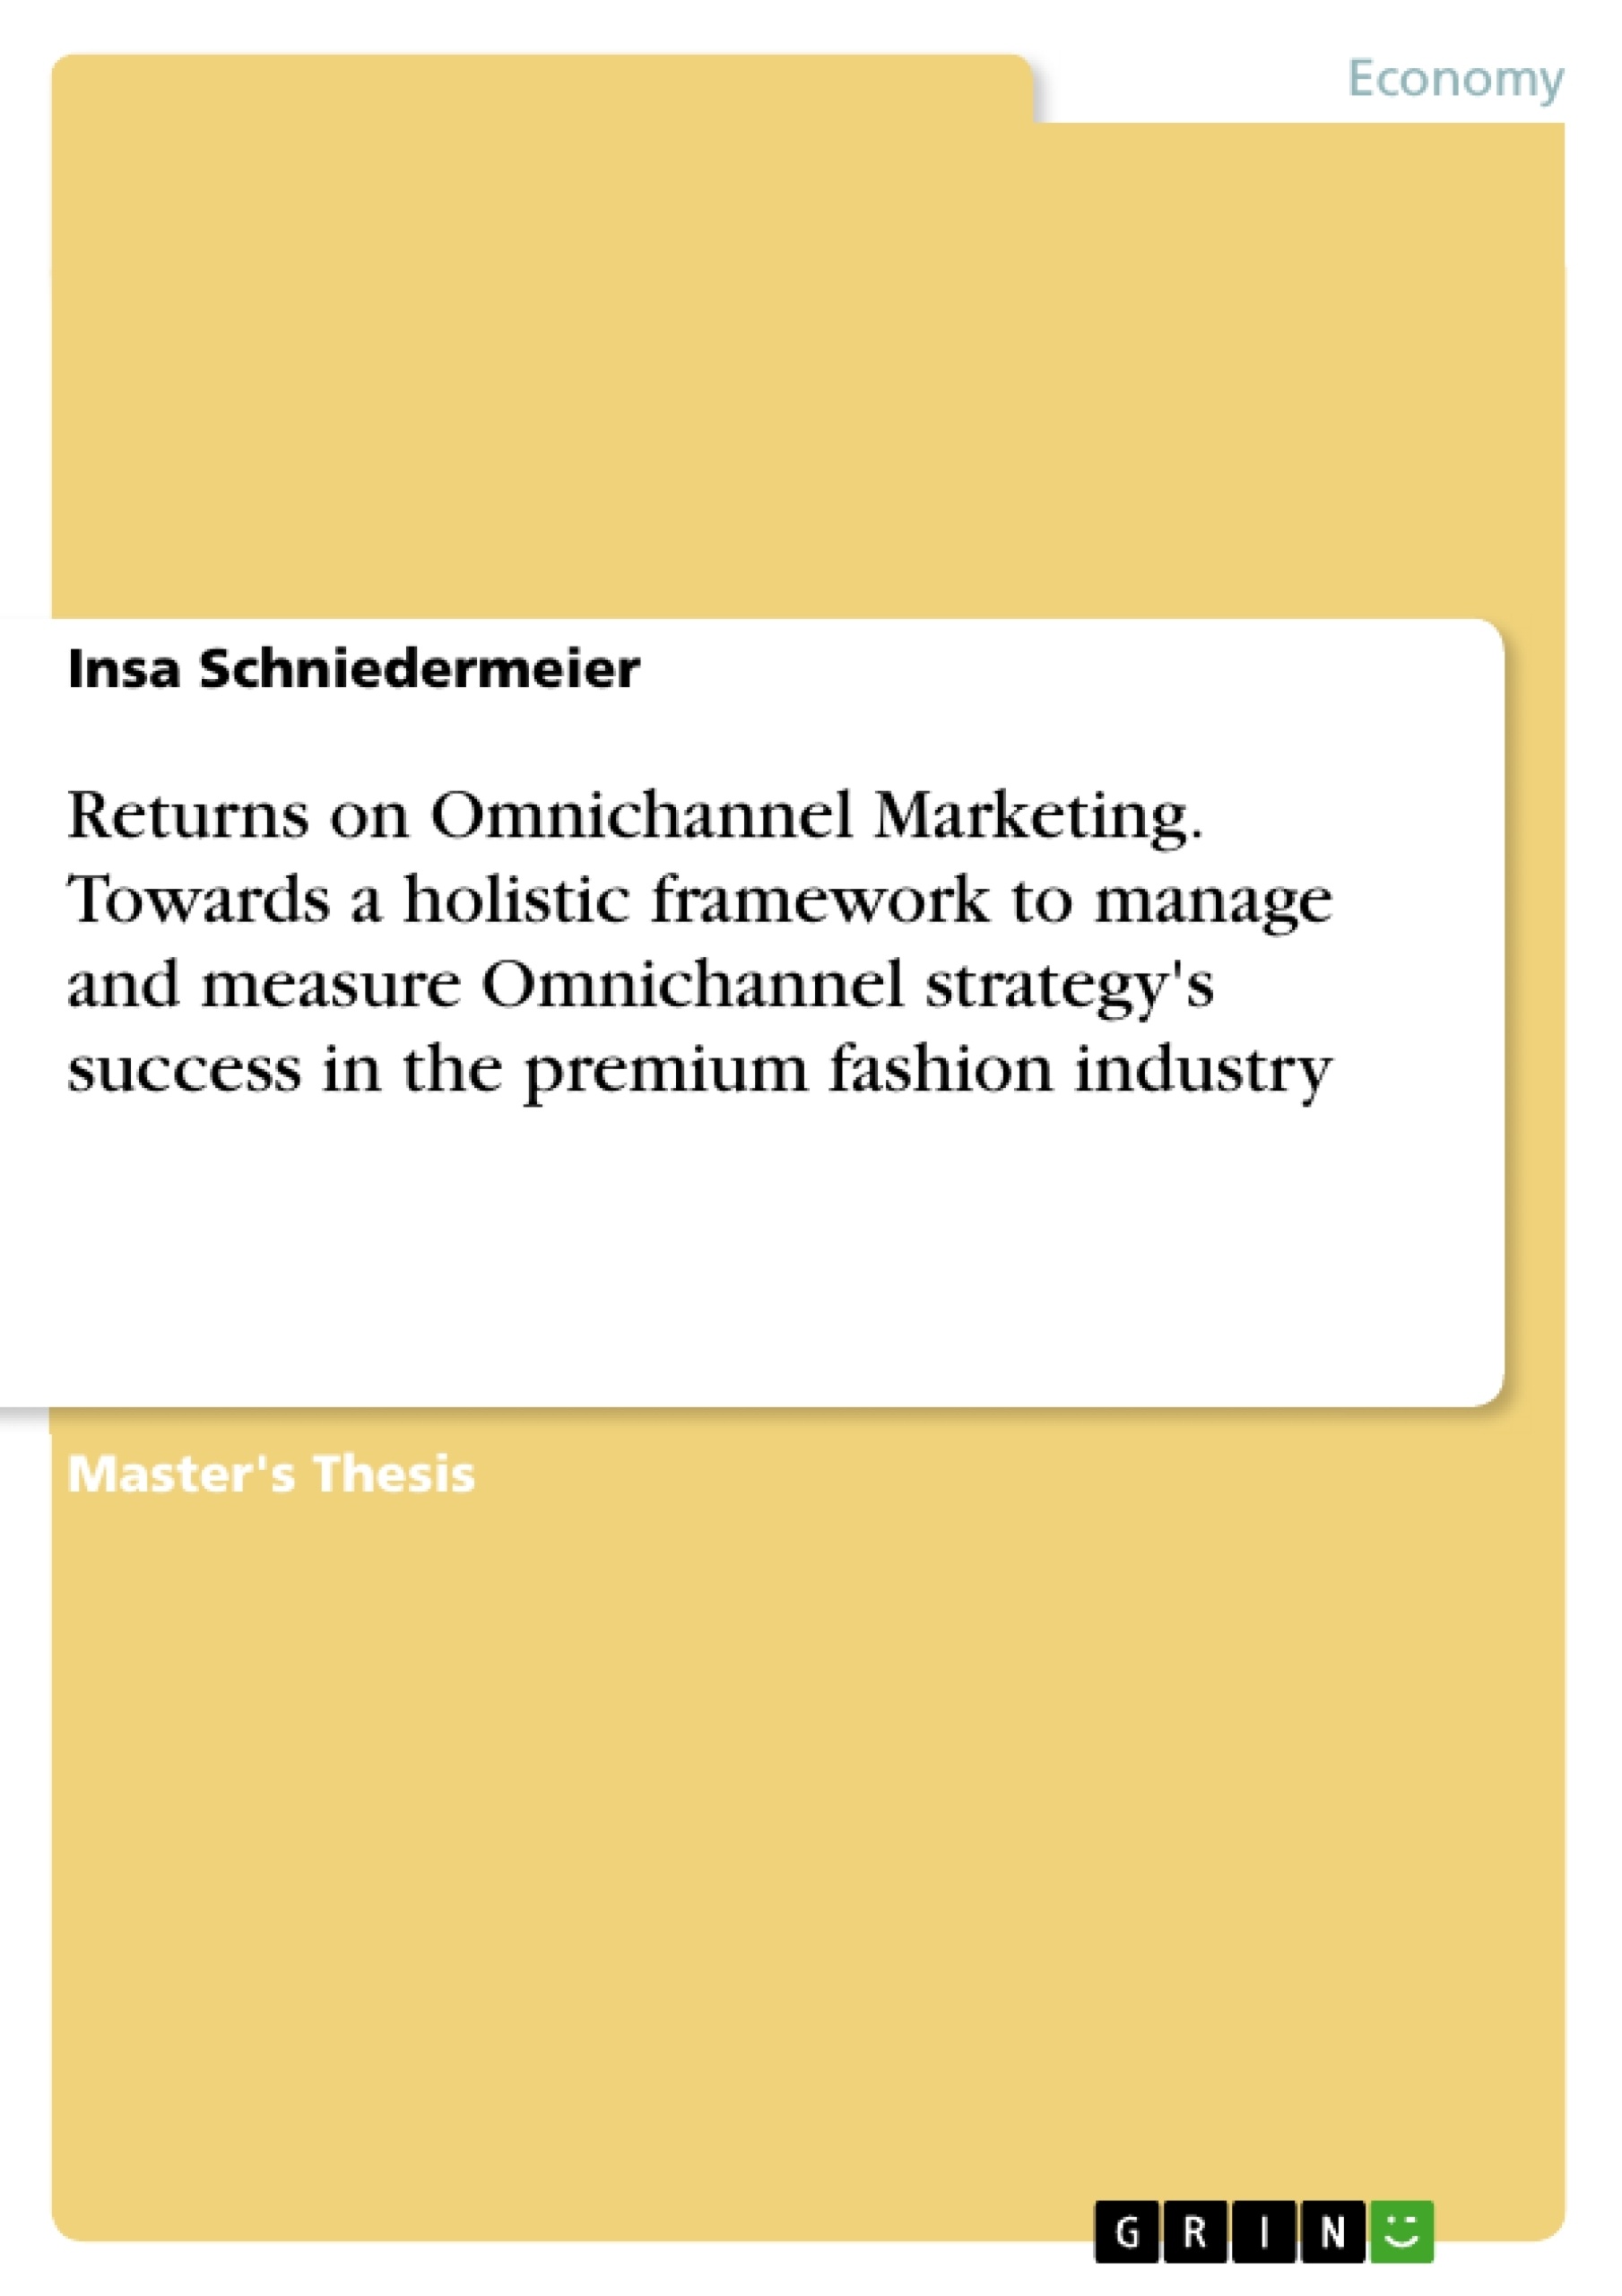 Título: Returns on Omnichannel Marketing. Towards a holistic framework to manage and measure Omnichannel strategy's success in the premium fashion industry